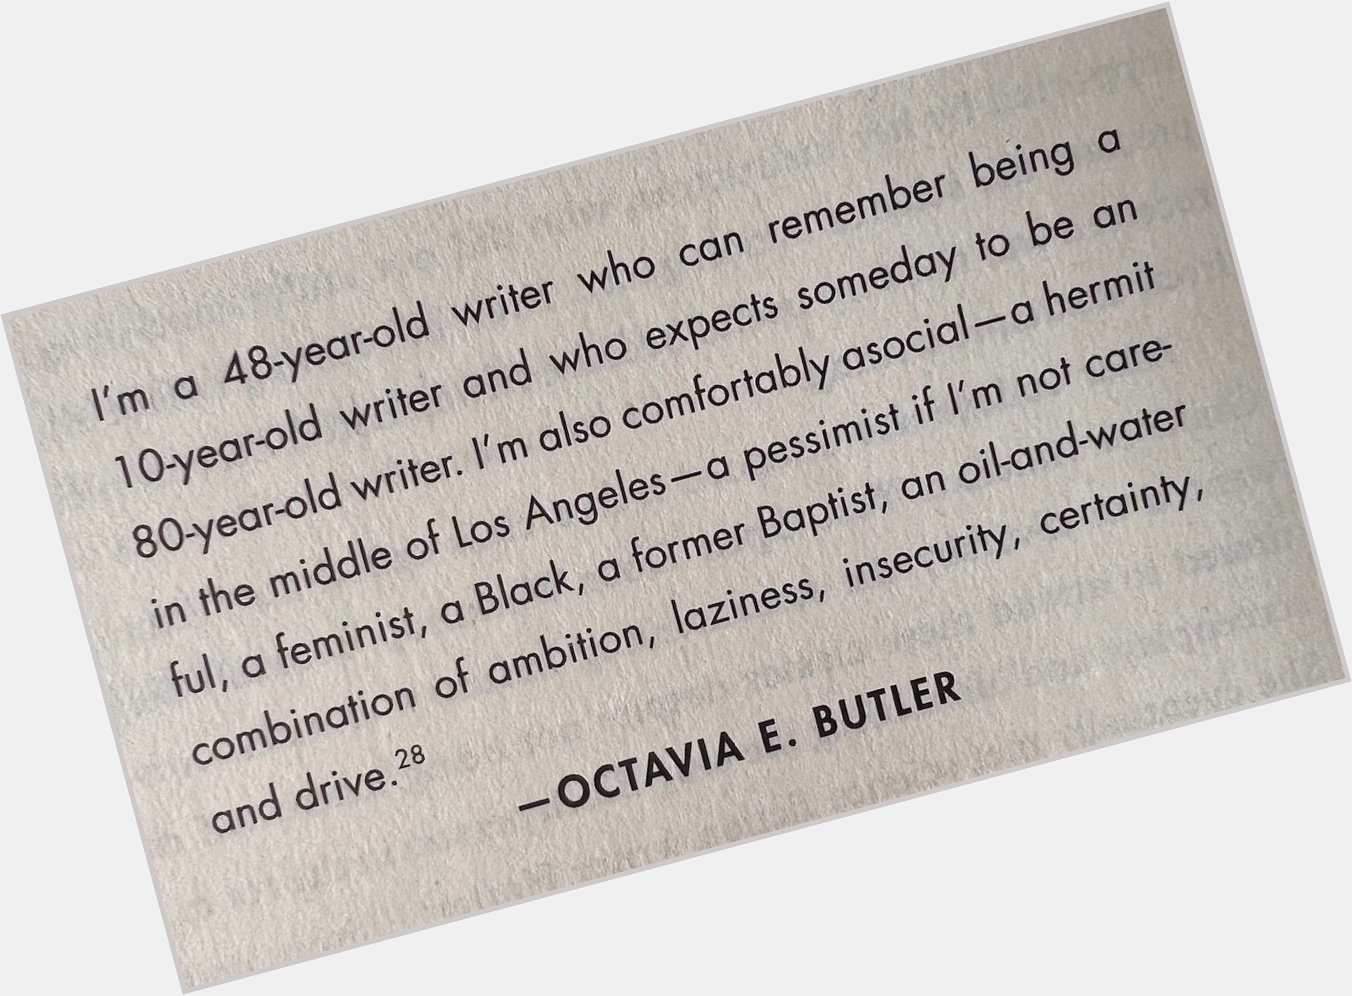 Happy birthday, Octavia E. Butler! You would ve turned 75 years old today! 